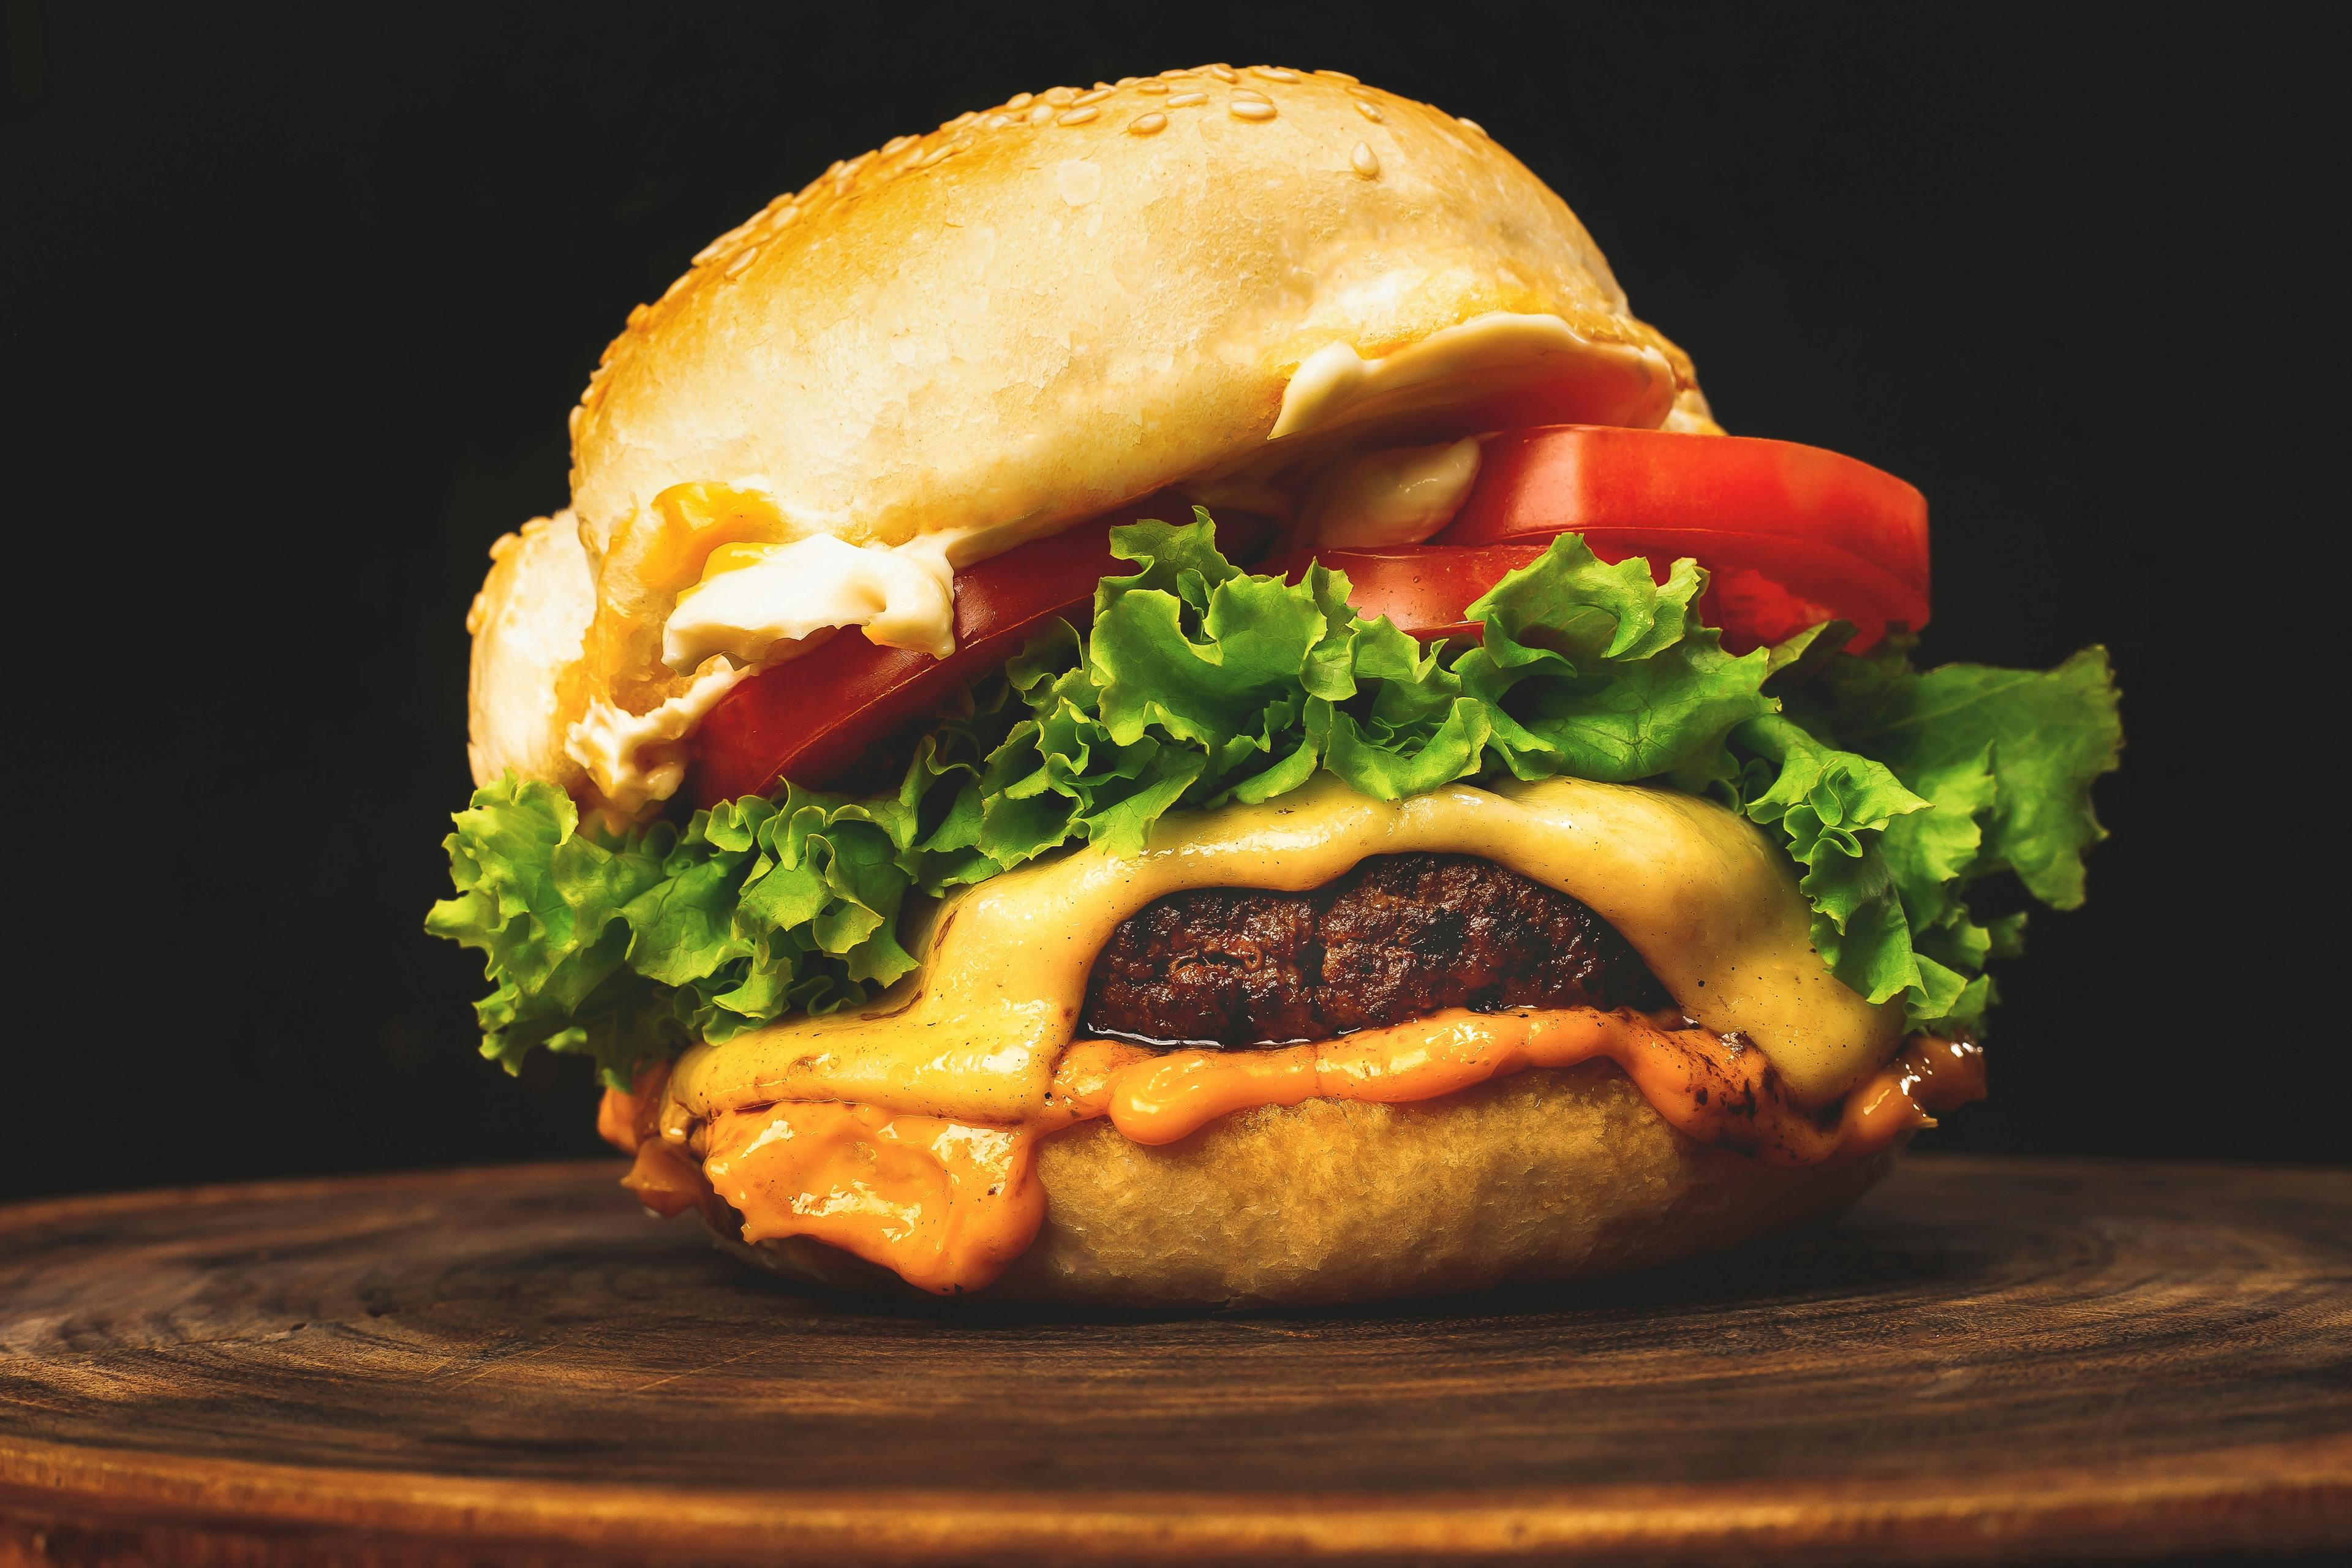 Photo of a hamburger on a wooden board with tomato, lettuce and cheese.